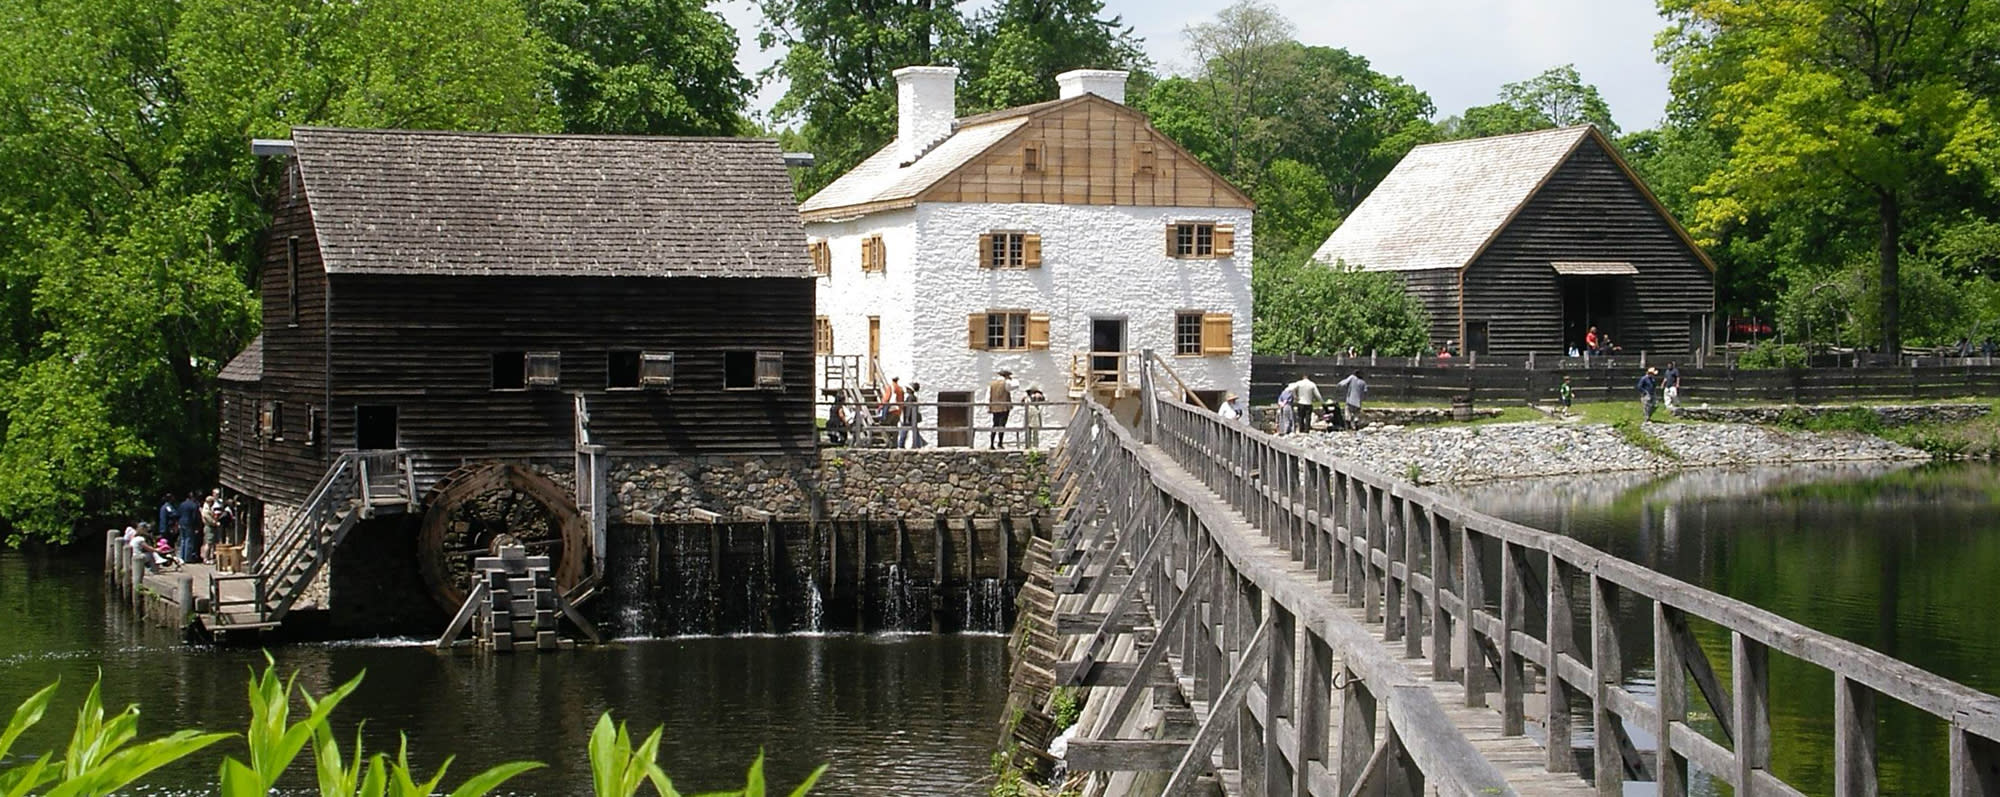 The exterior of Phillipsburg Manor Mill and Bridge from across a bridge